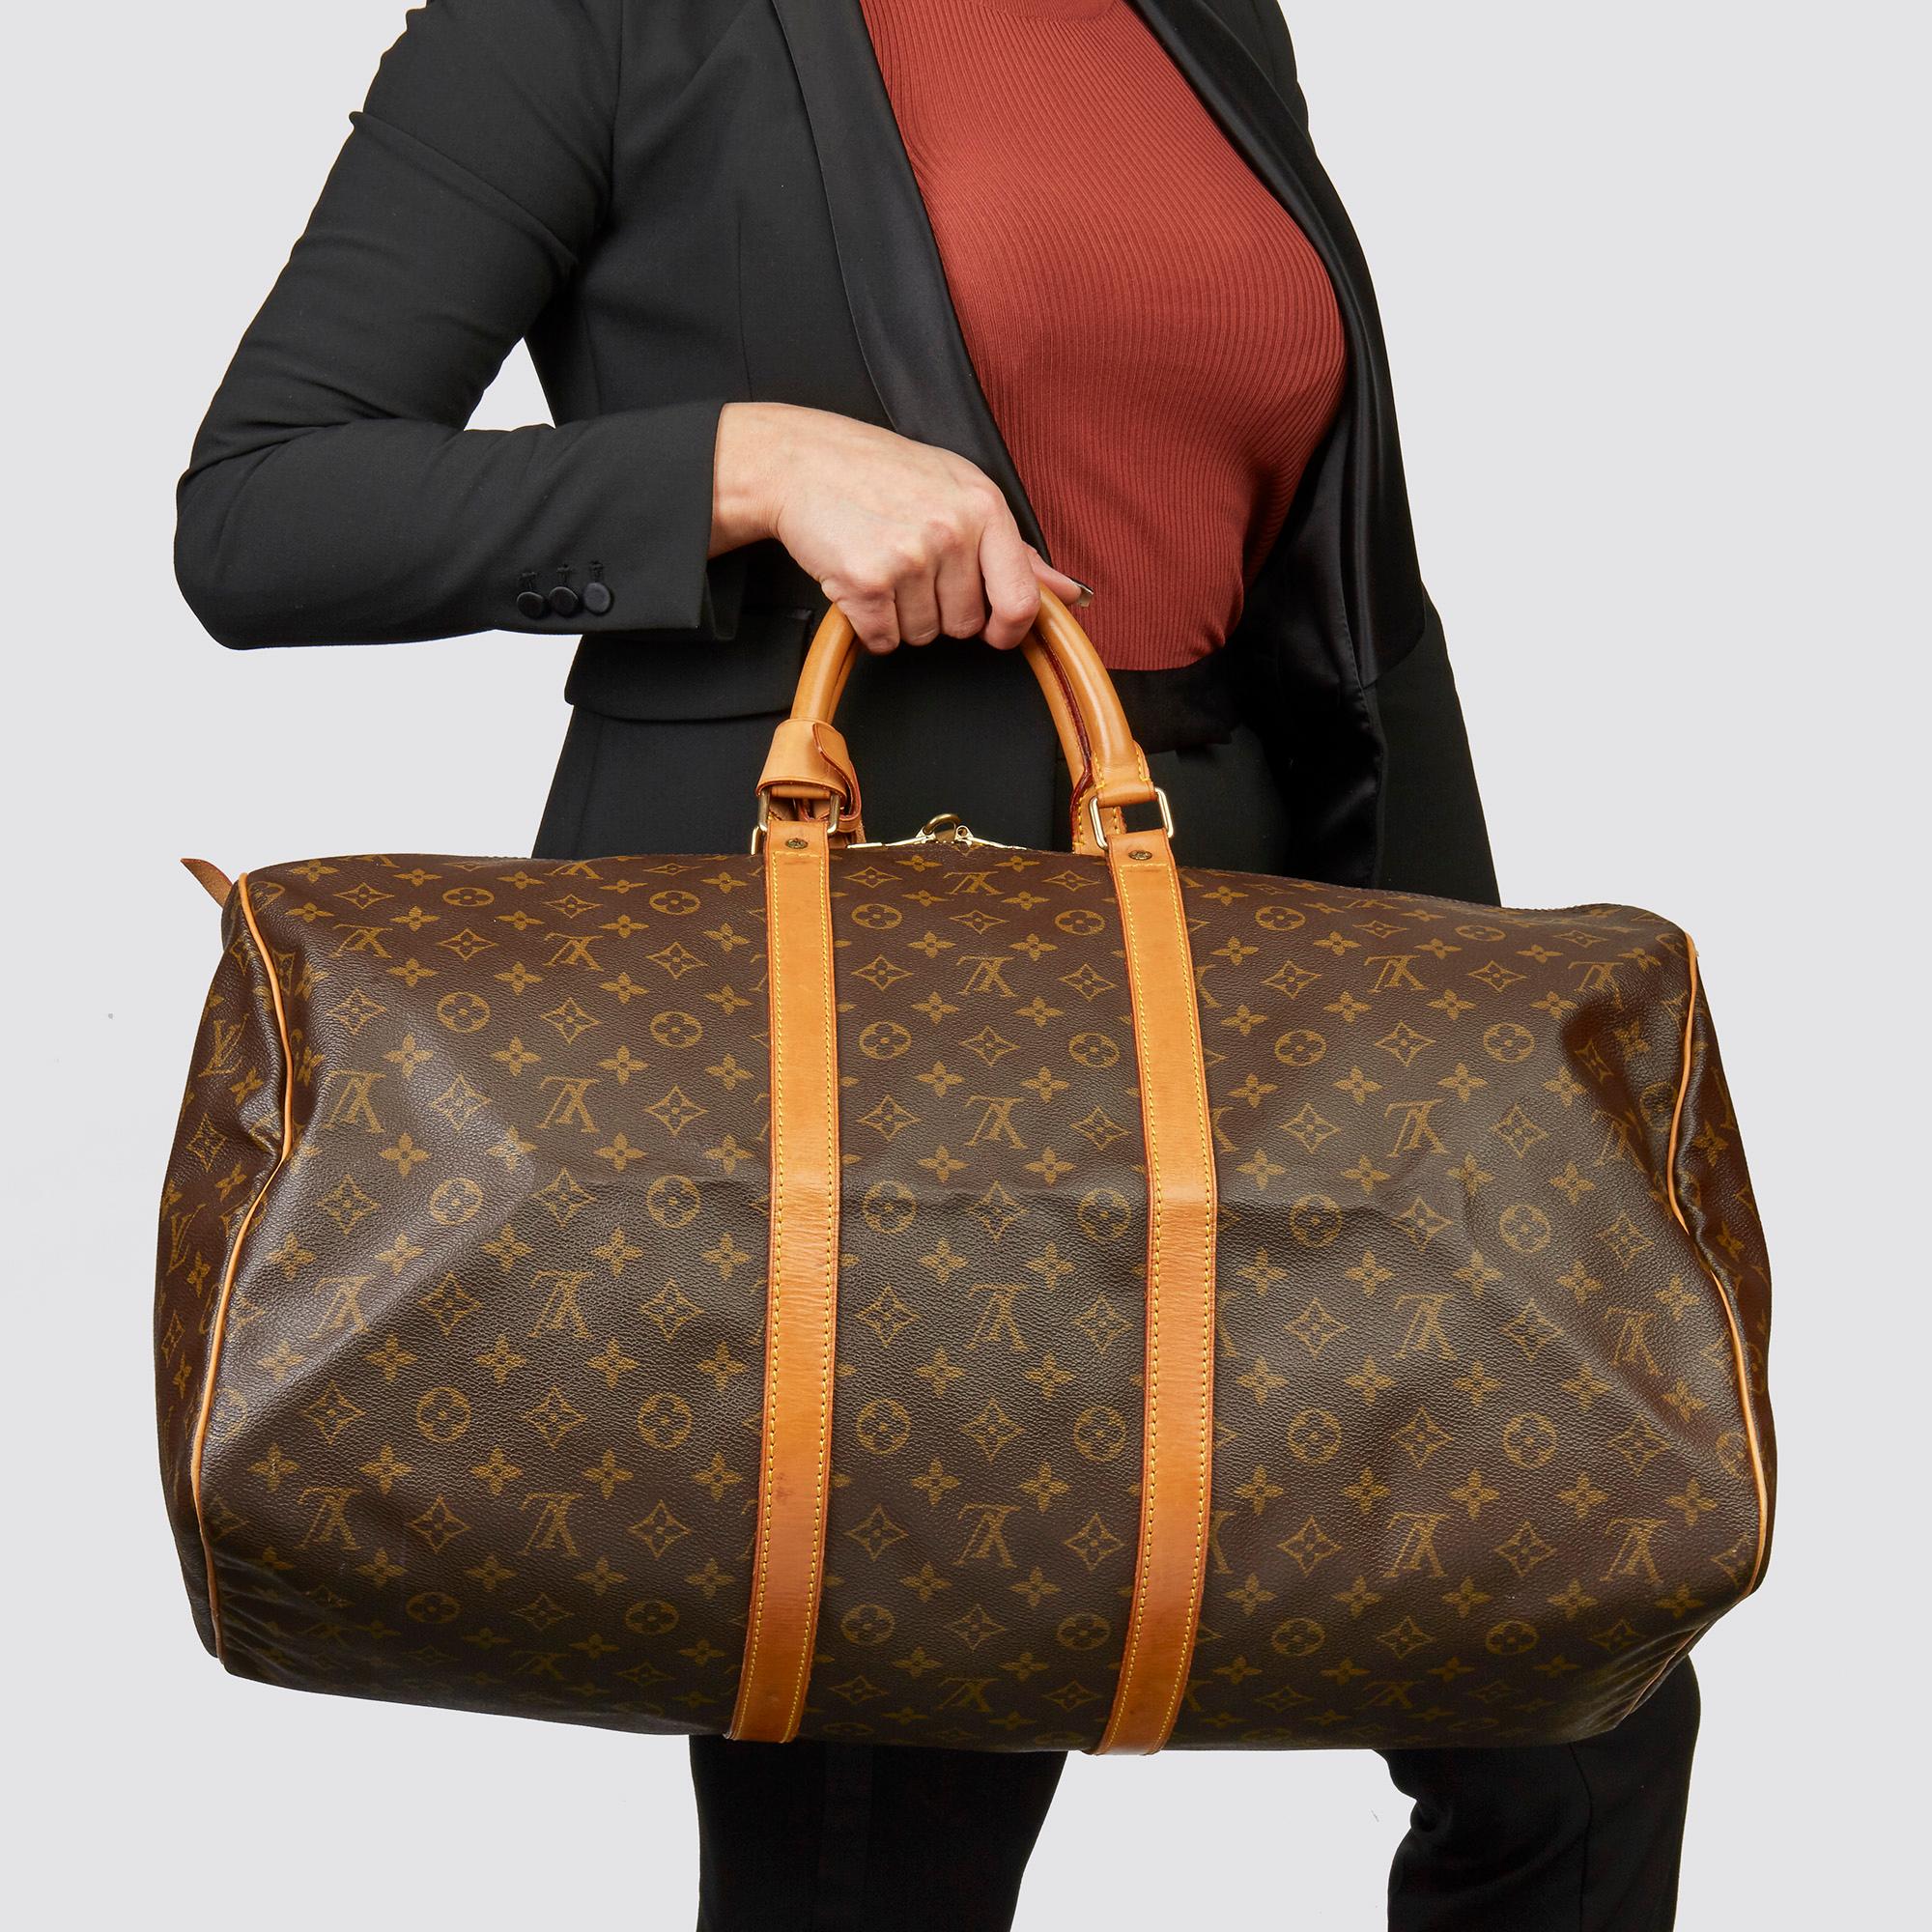 LOUIS VUITTON
Brown Monogram Coated Canvas & Vachetta Leather Vintage Keepall 55

Xupes Reference: HB3586
Serial Number: MI1921
Age (Circa): 1991
Accompanied By: Handle Keeper, Luggage Tag, Padlock, Keys
Authenticity Details: Date Stamp (Made in